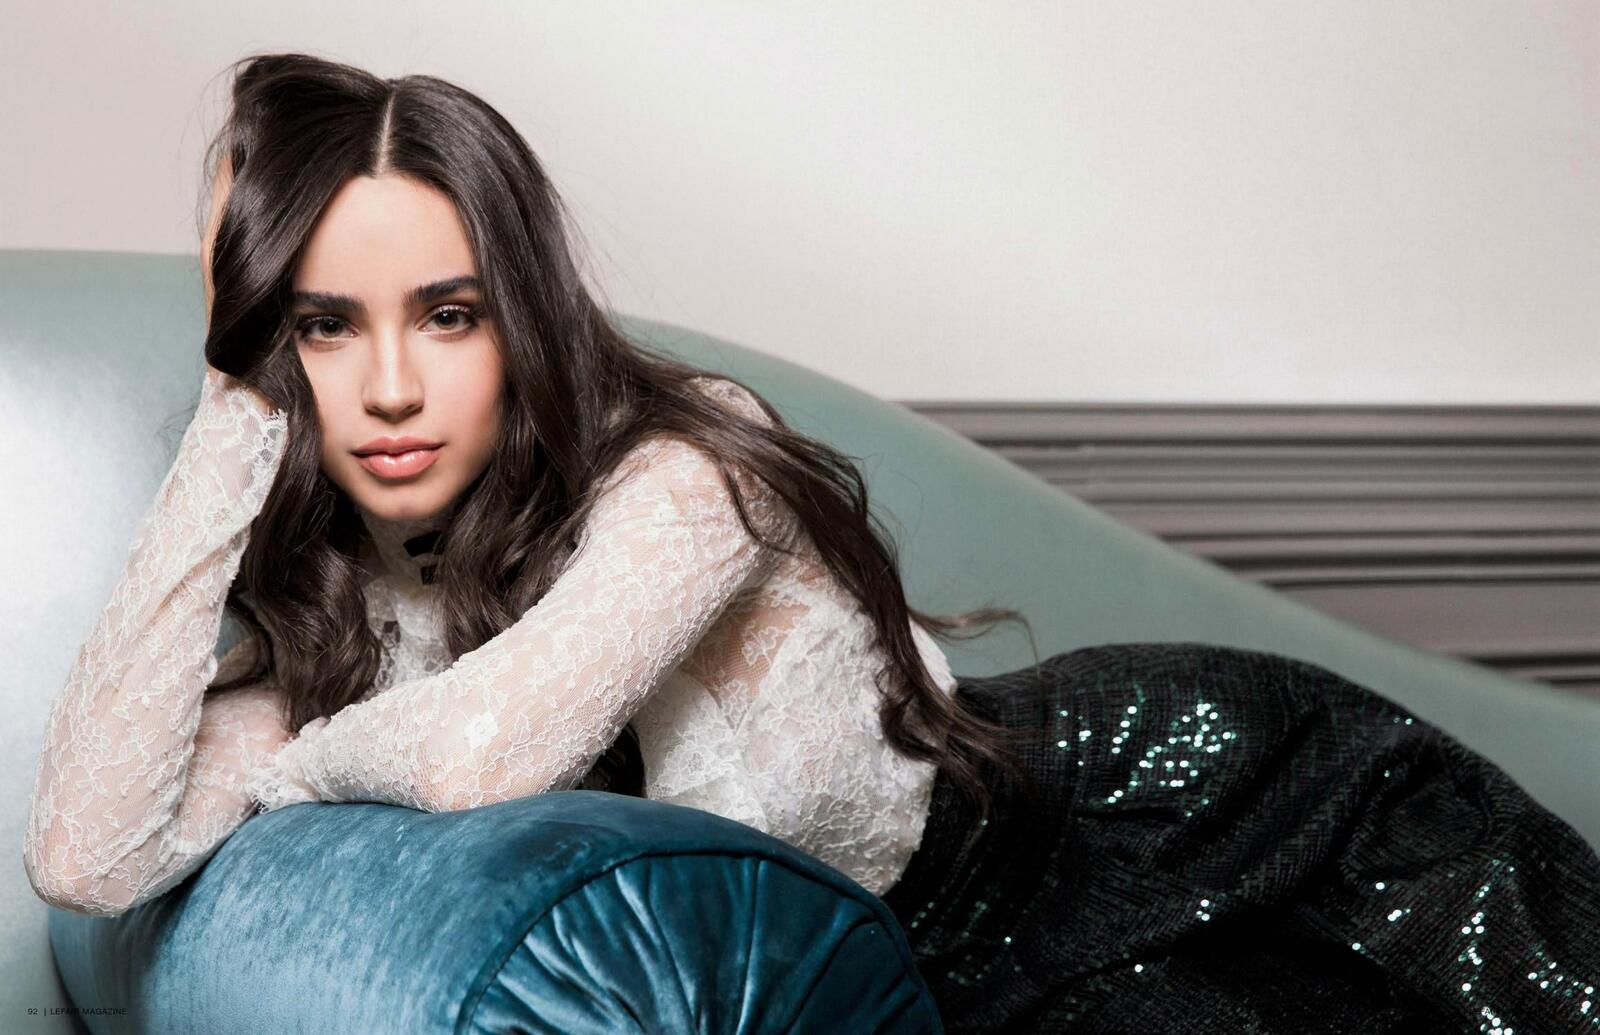 Wallpapers Sofia Carson music celebrities on the desktop